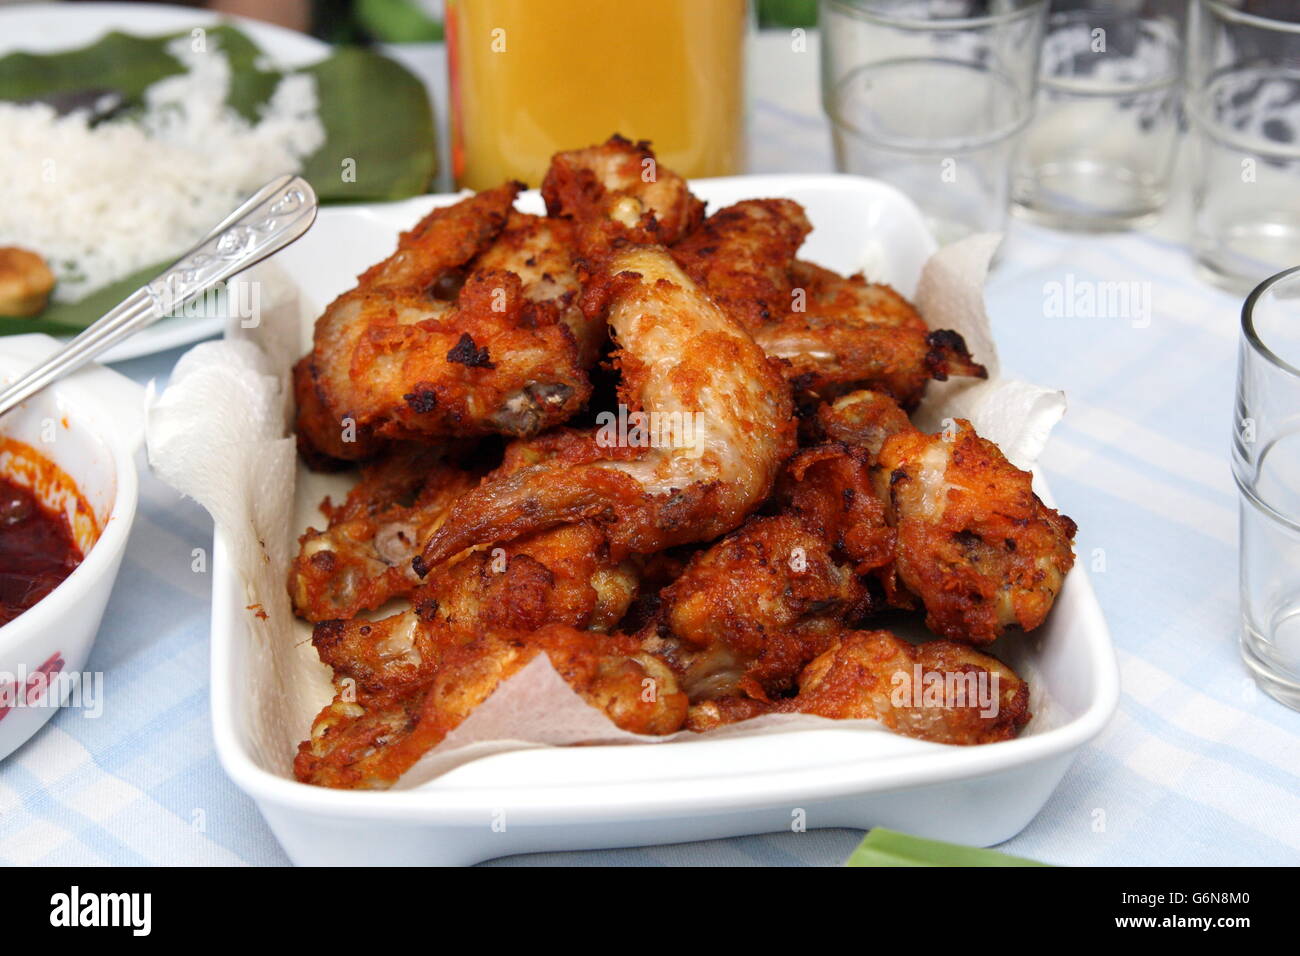 Close up of Marinated fried chicken in white serving platter Stock Photo